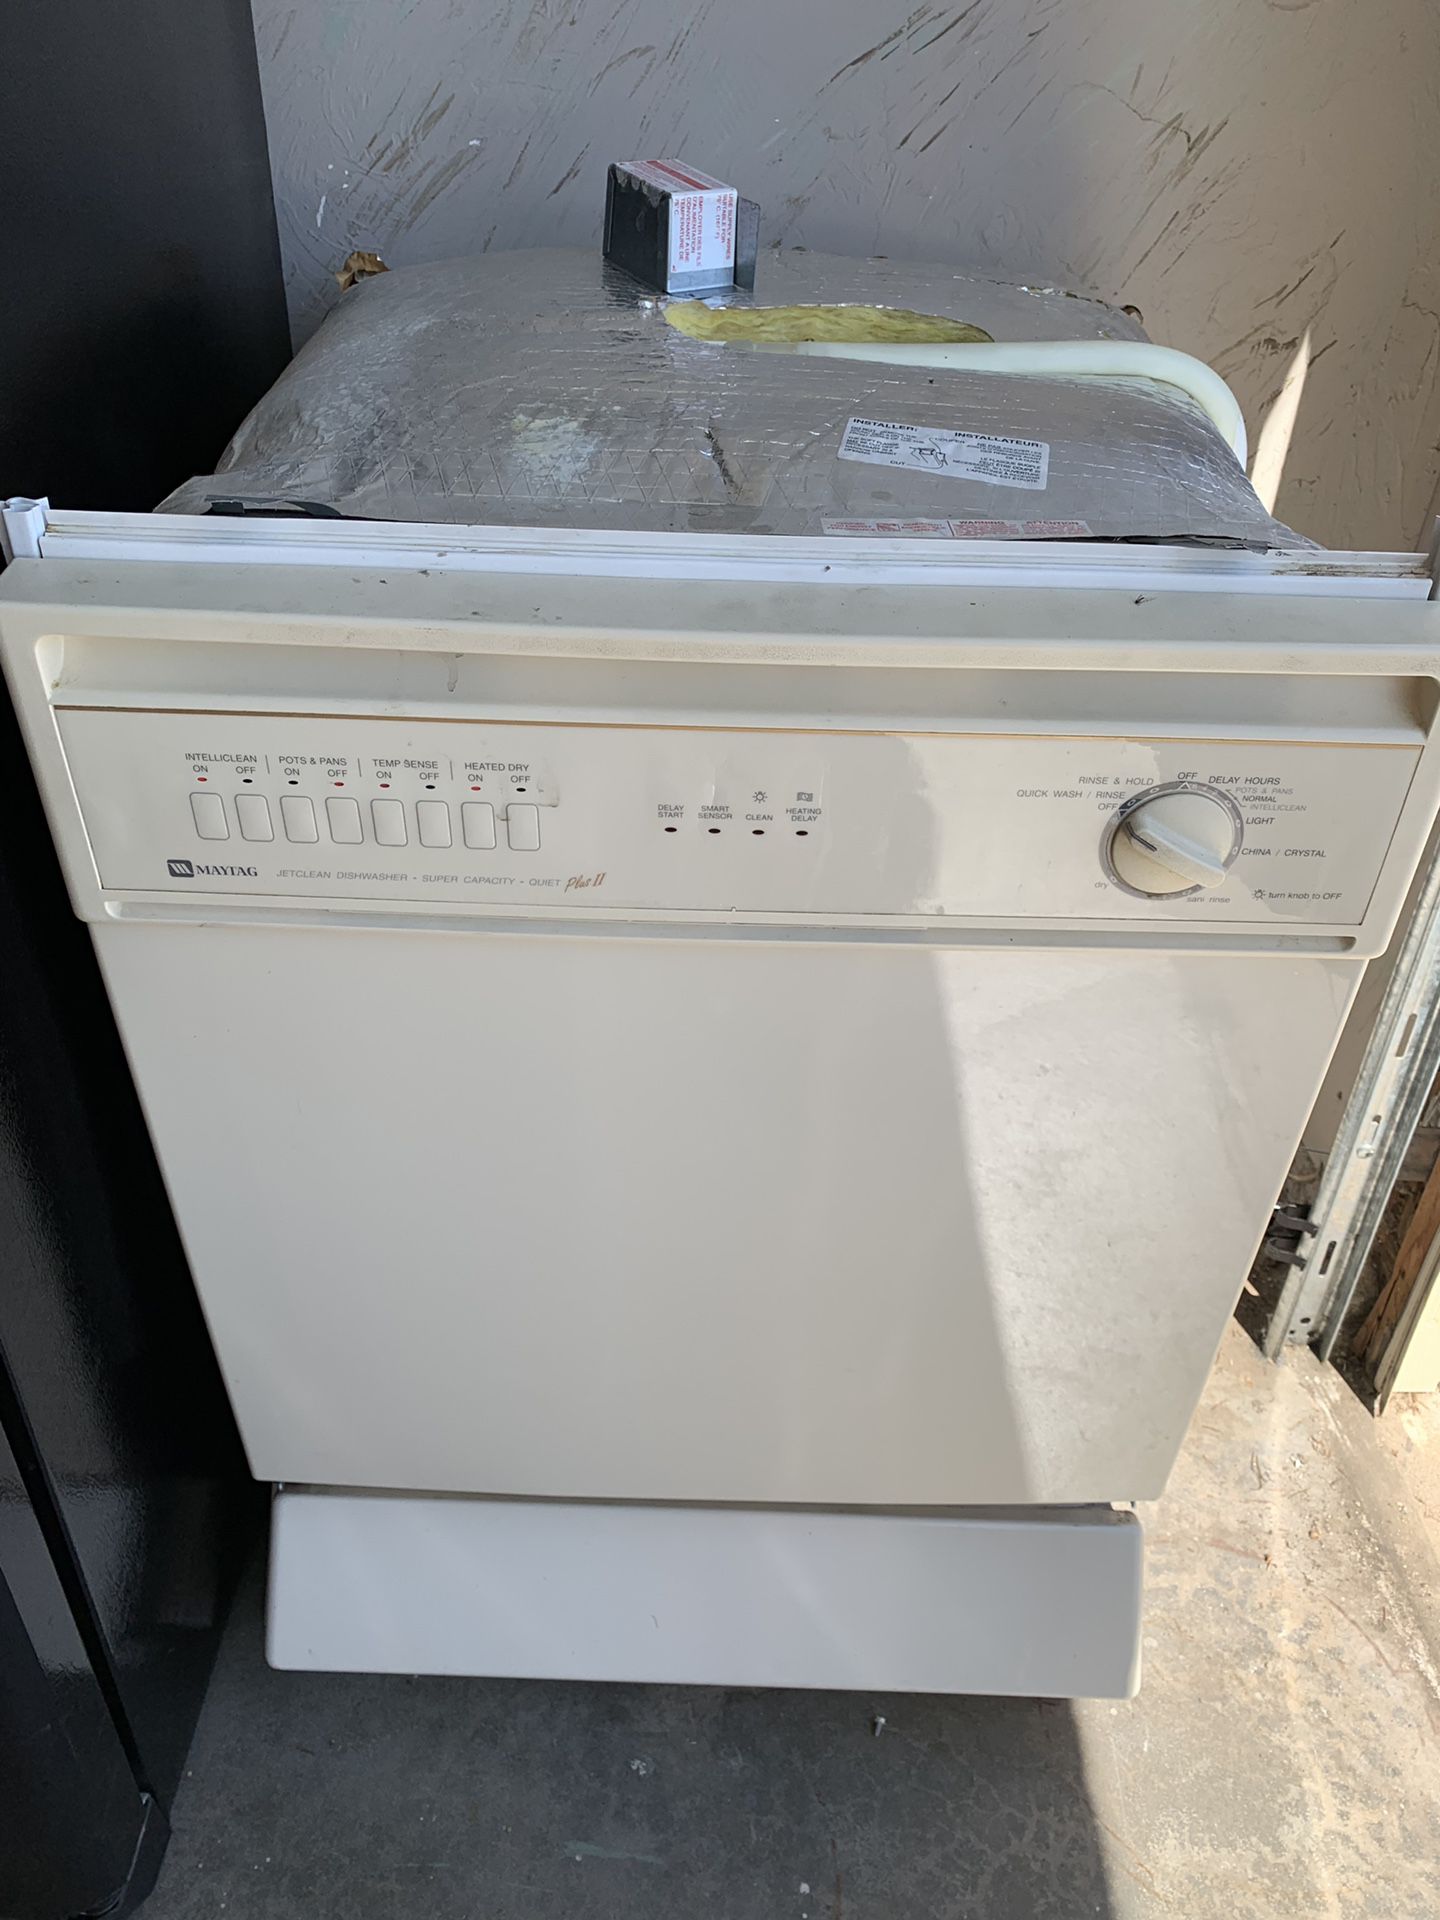 Maytag jet clean super capacity quiet plus II dishwasher. Works well. Remodeling kitchen and got new appliances